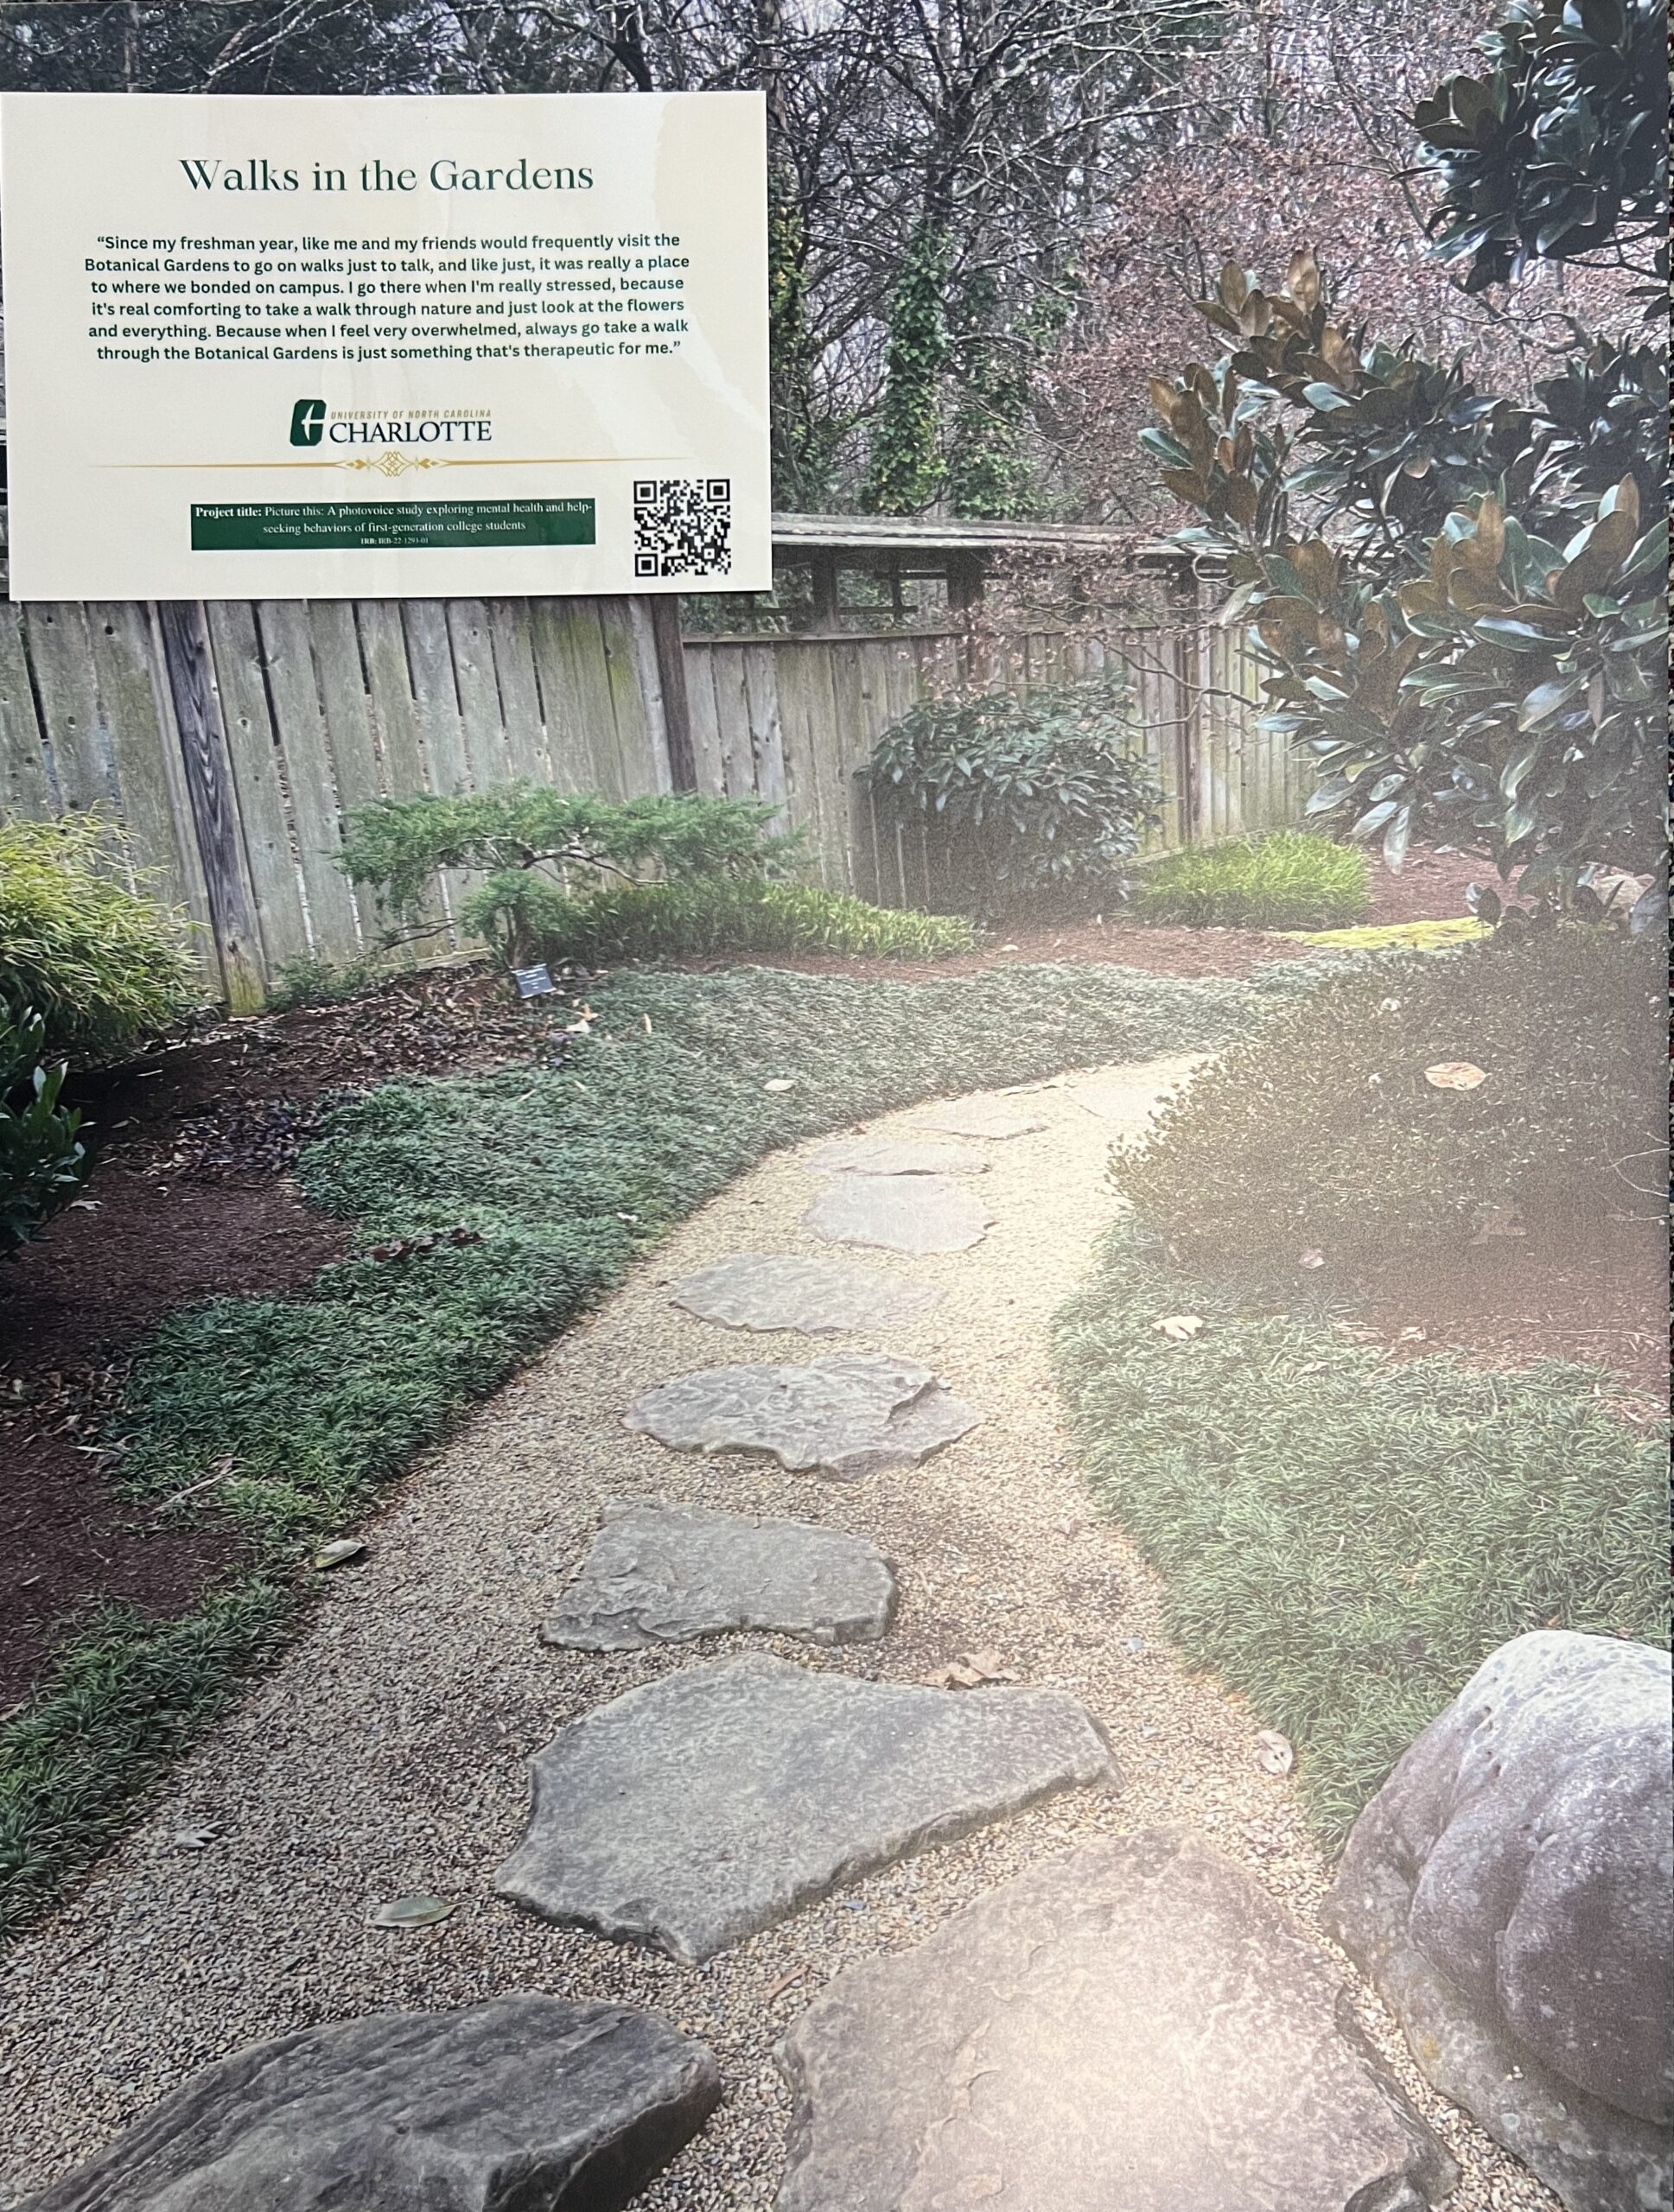 A path through a garden next to a fence, with a sign in the upper left hand corner.  